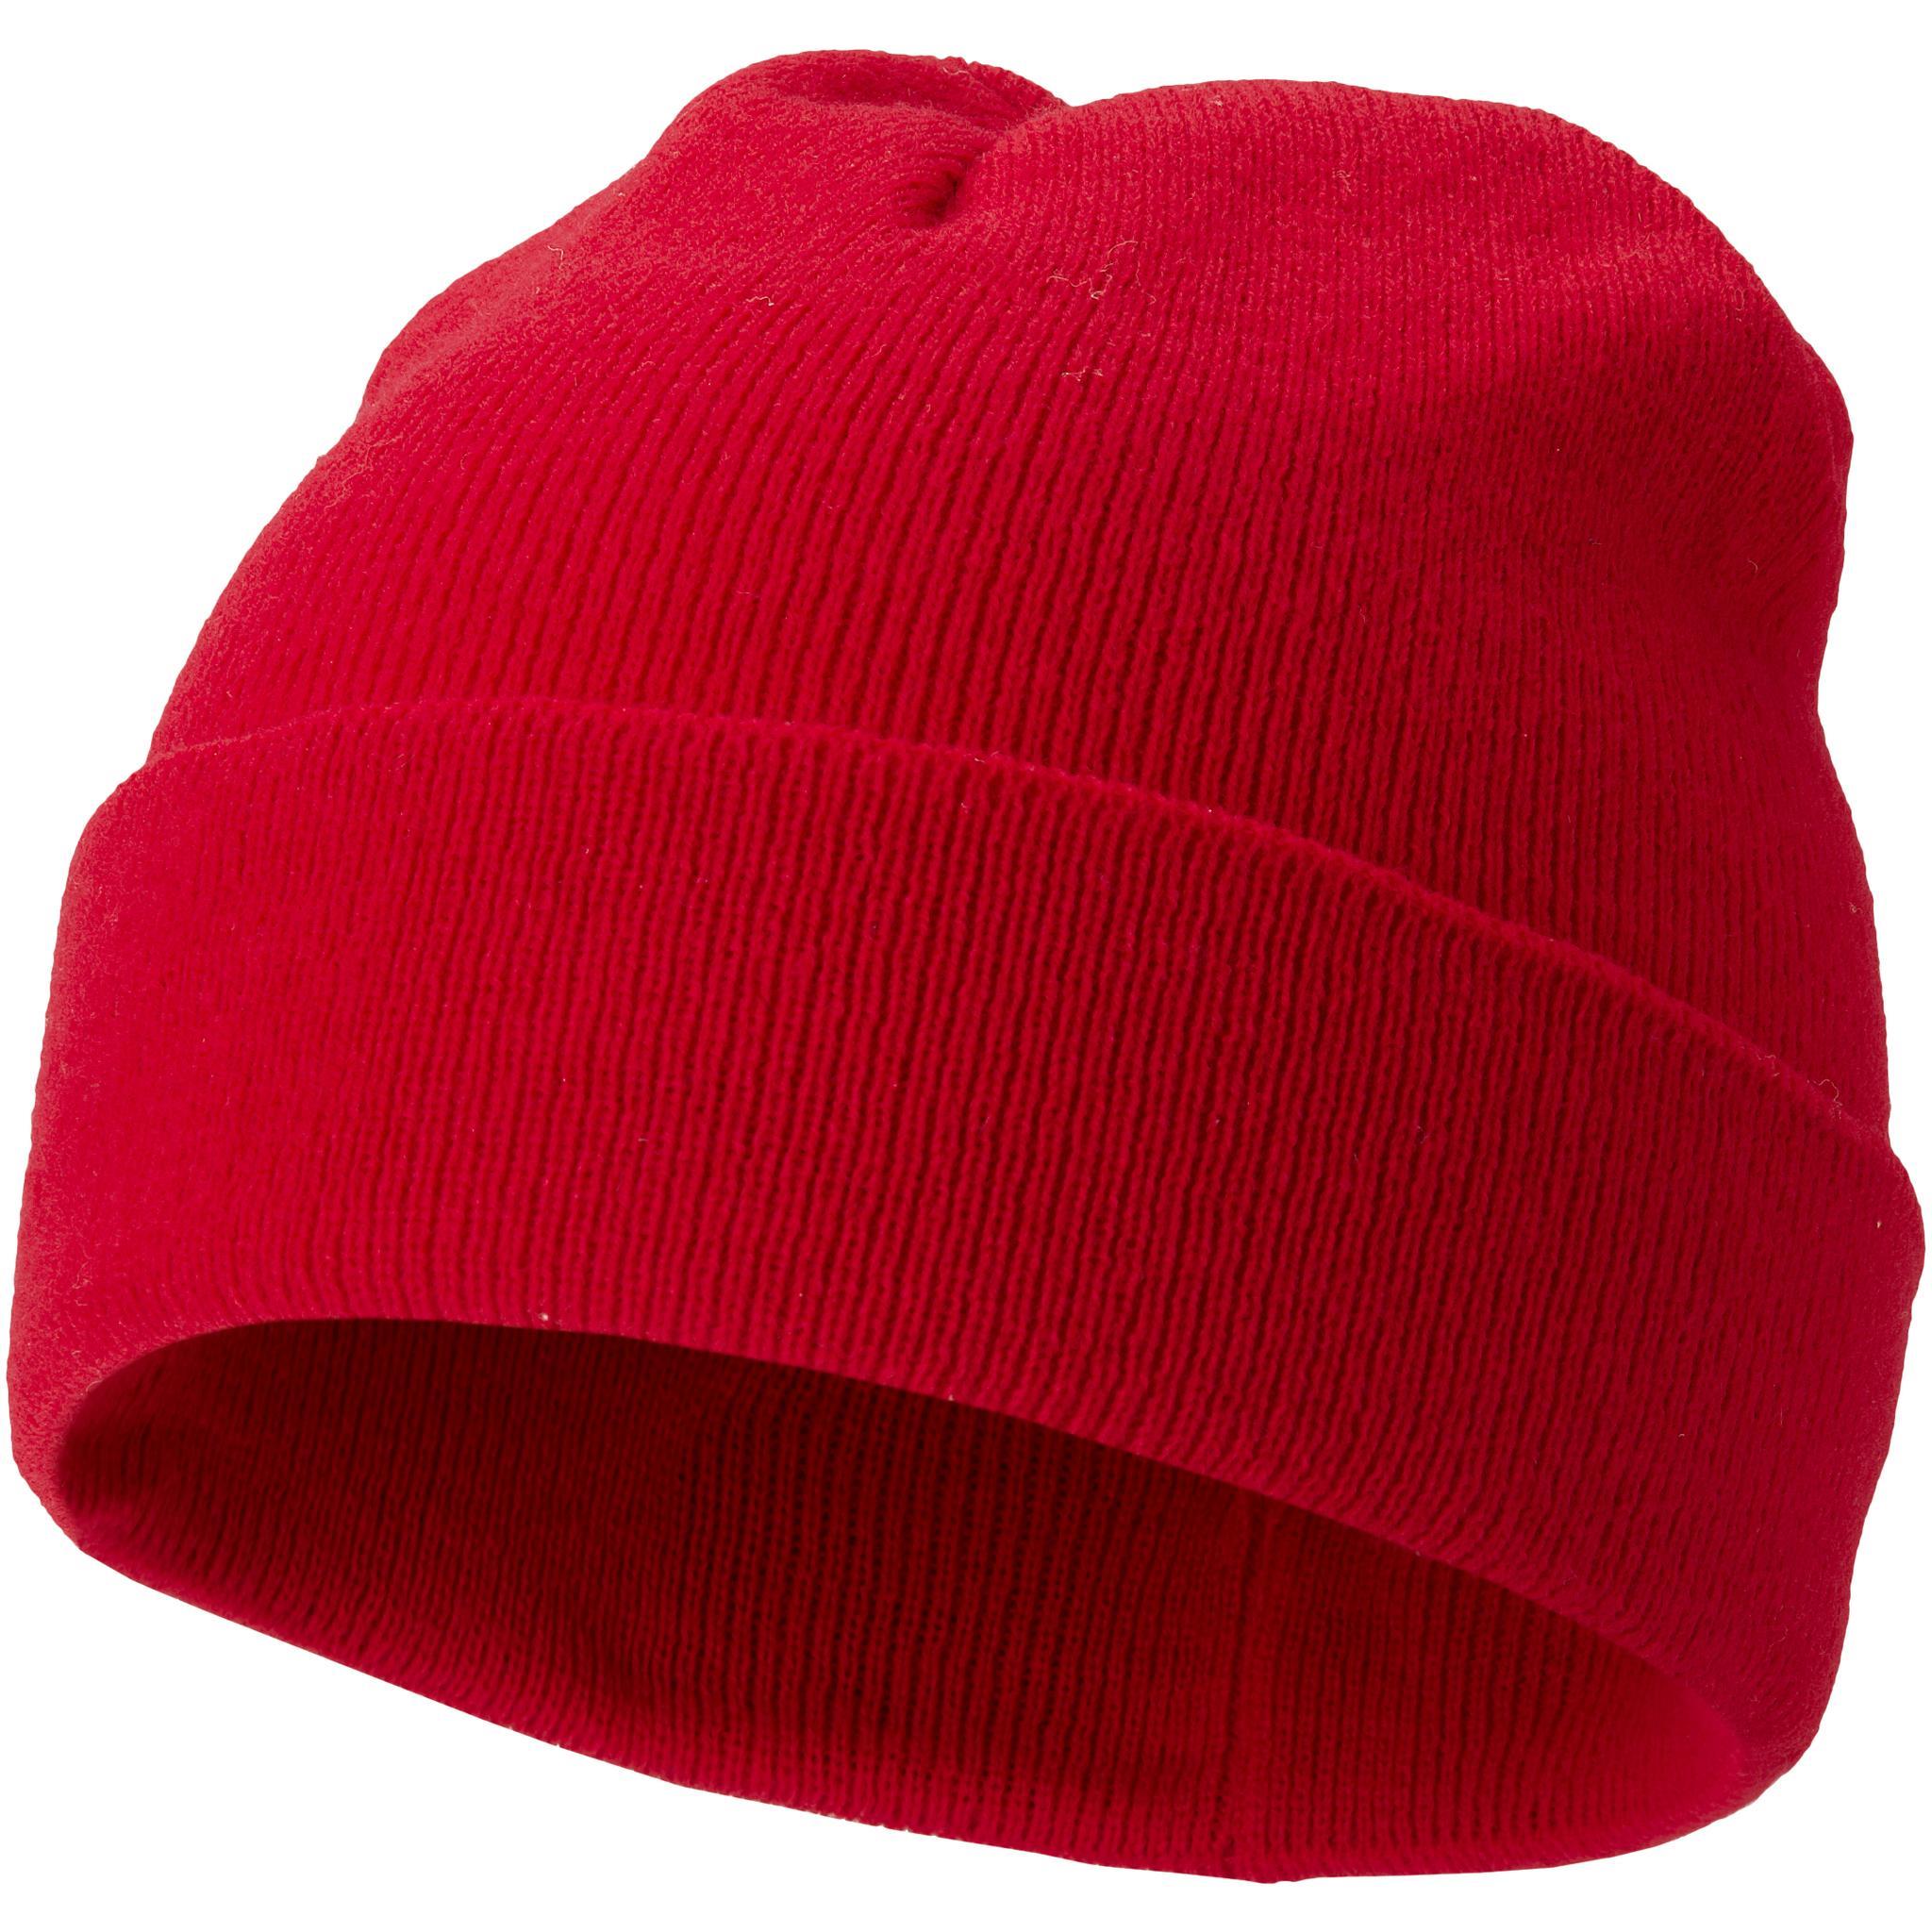 Bullet Irwin Beanie (Red) (One Size)